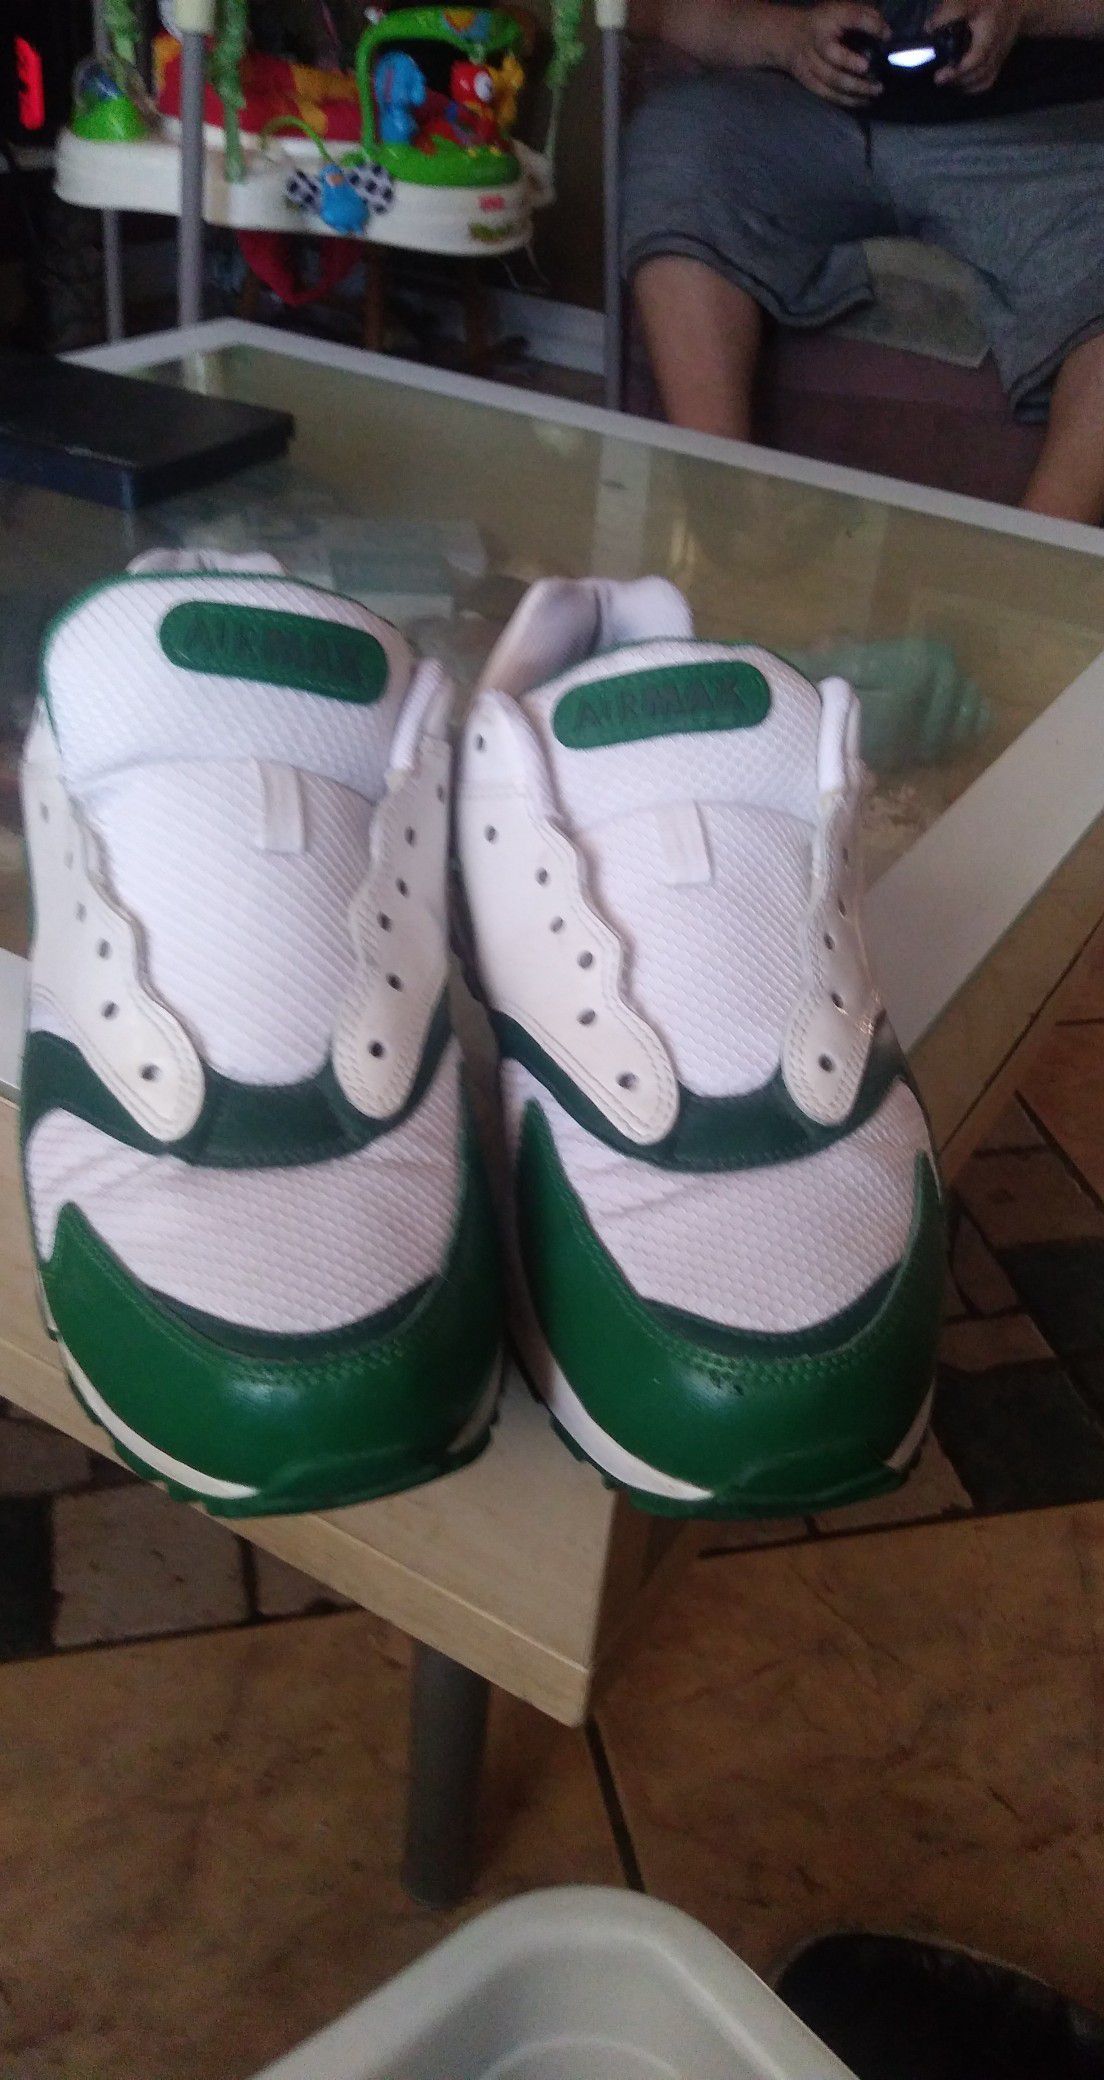 Nike Air shoes size 10 in men